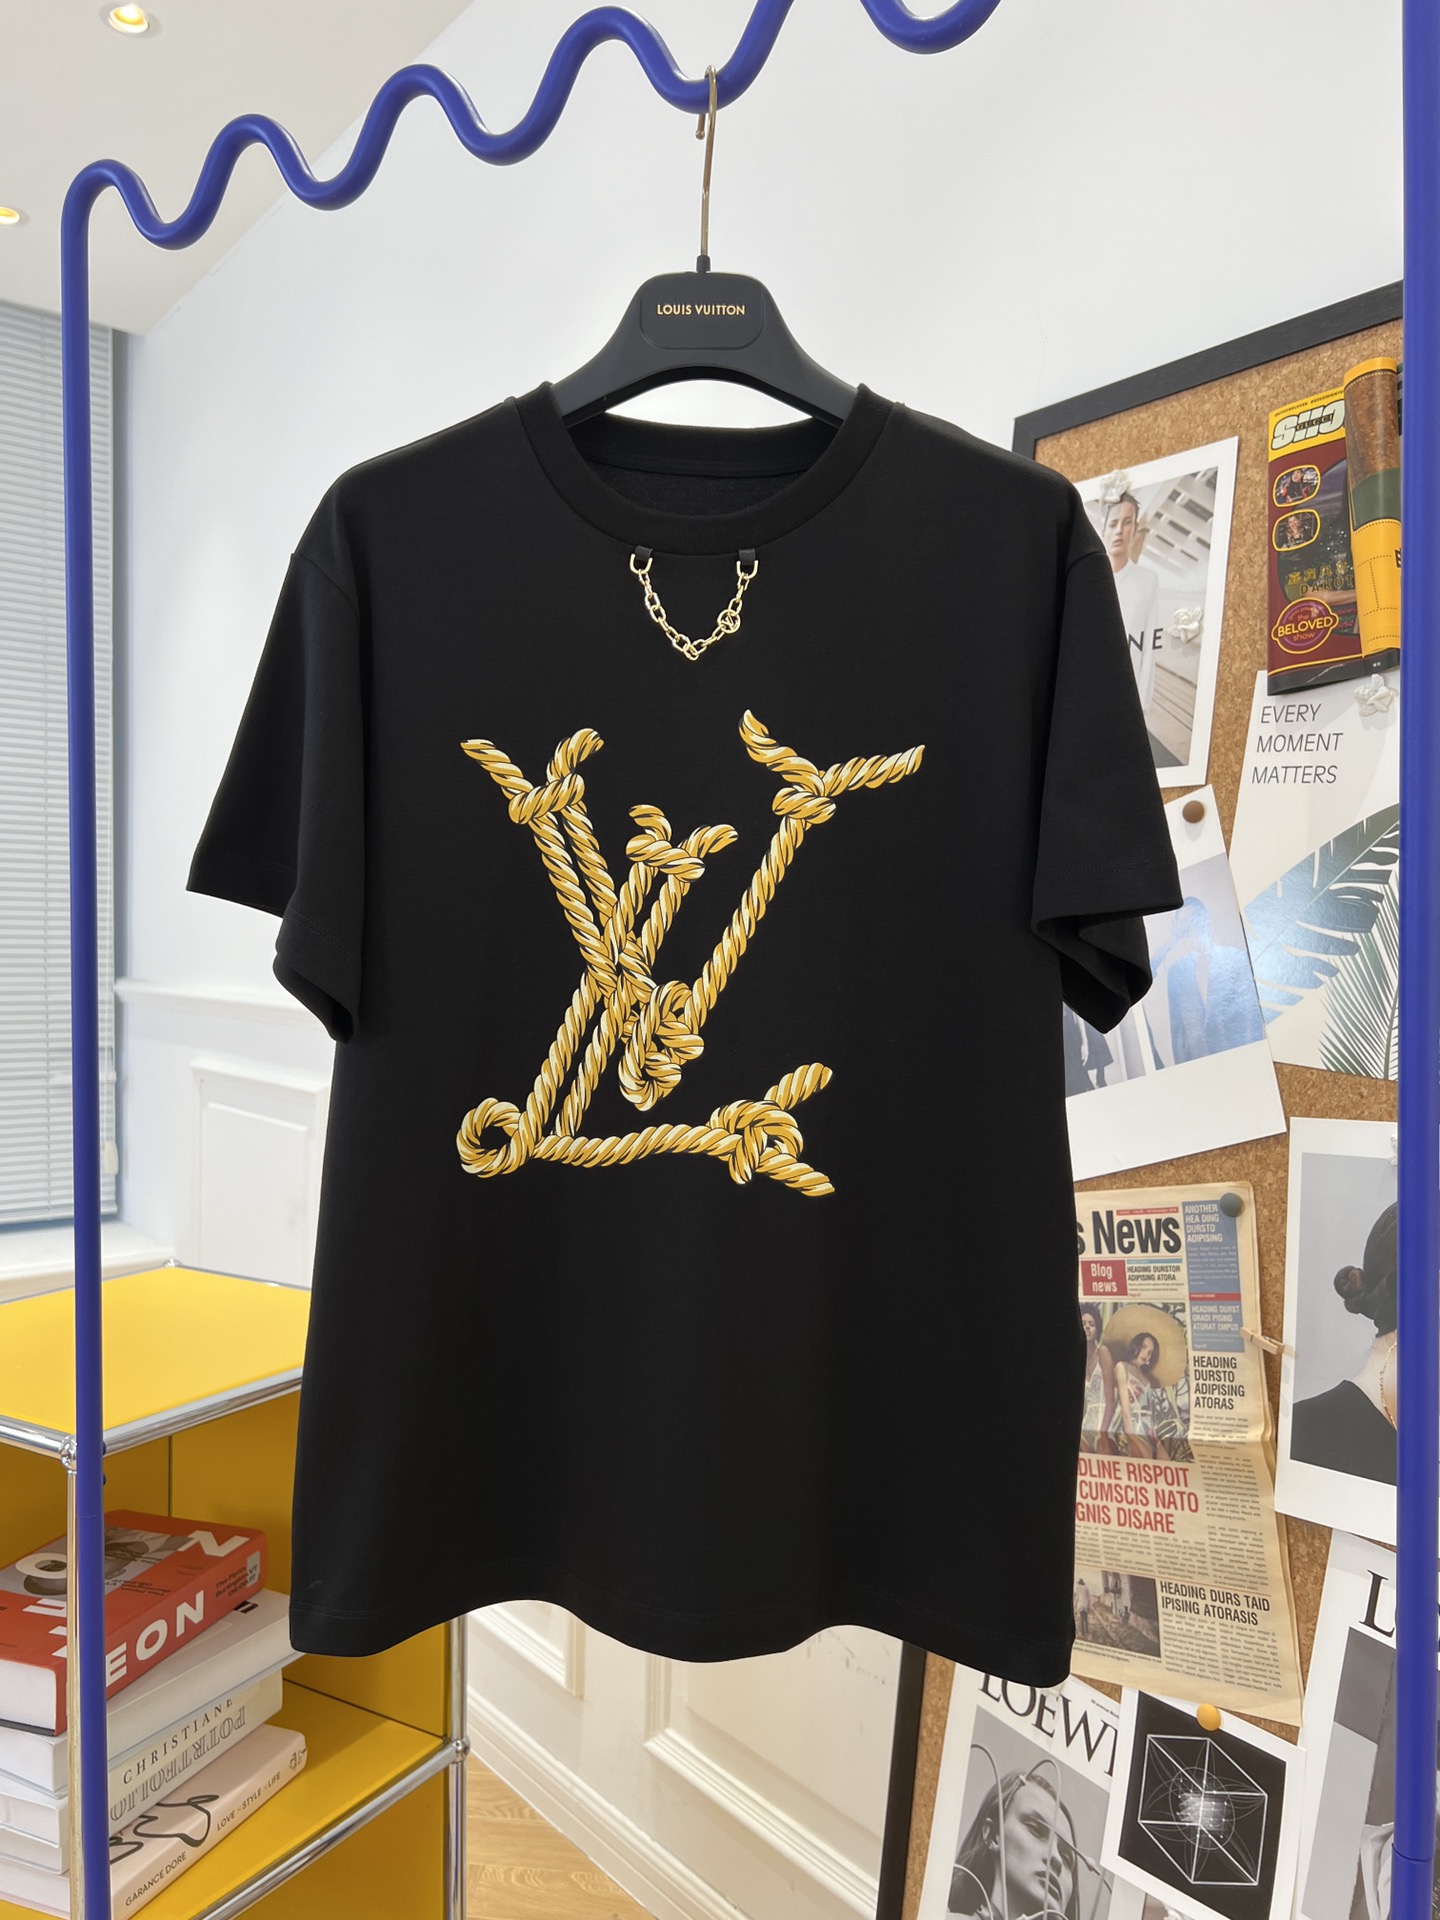 AAA
 Louis Vuitton Clothing T-Shirt Black White Printing Cotton Knitting Spring/Summer Collection Casual